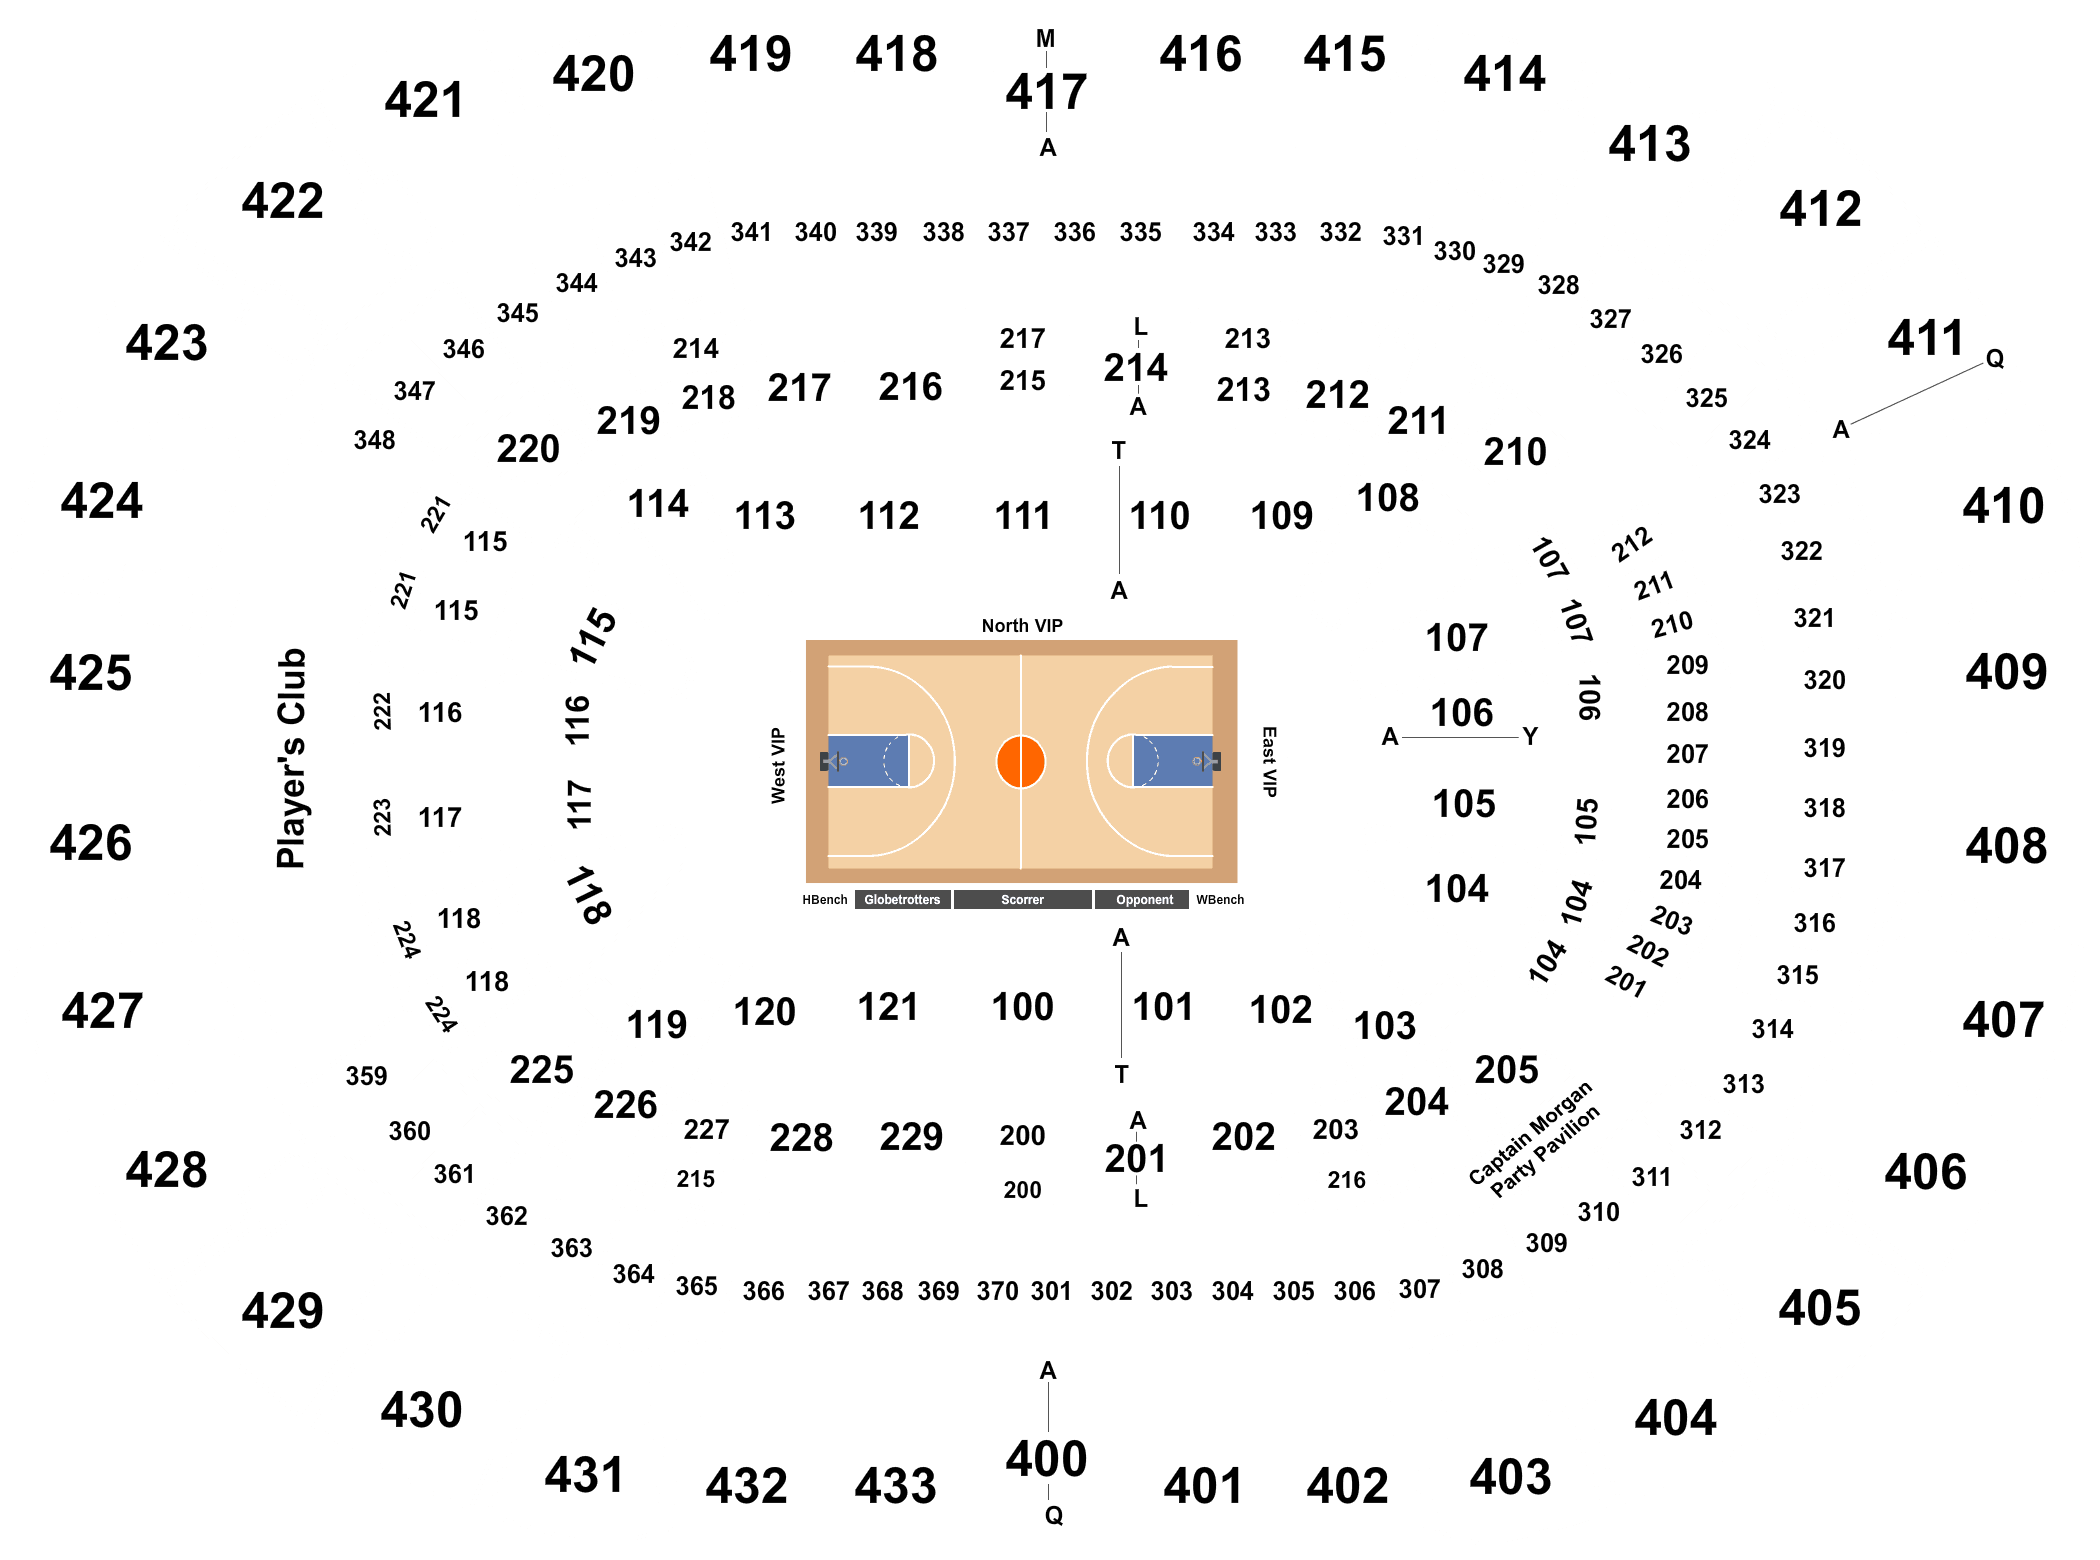 Seating Charts  Capital One Arena